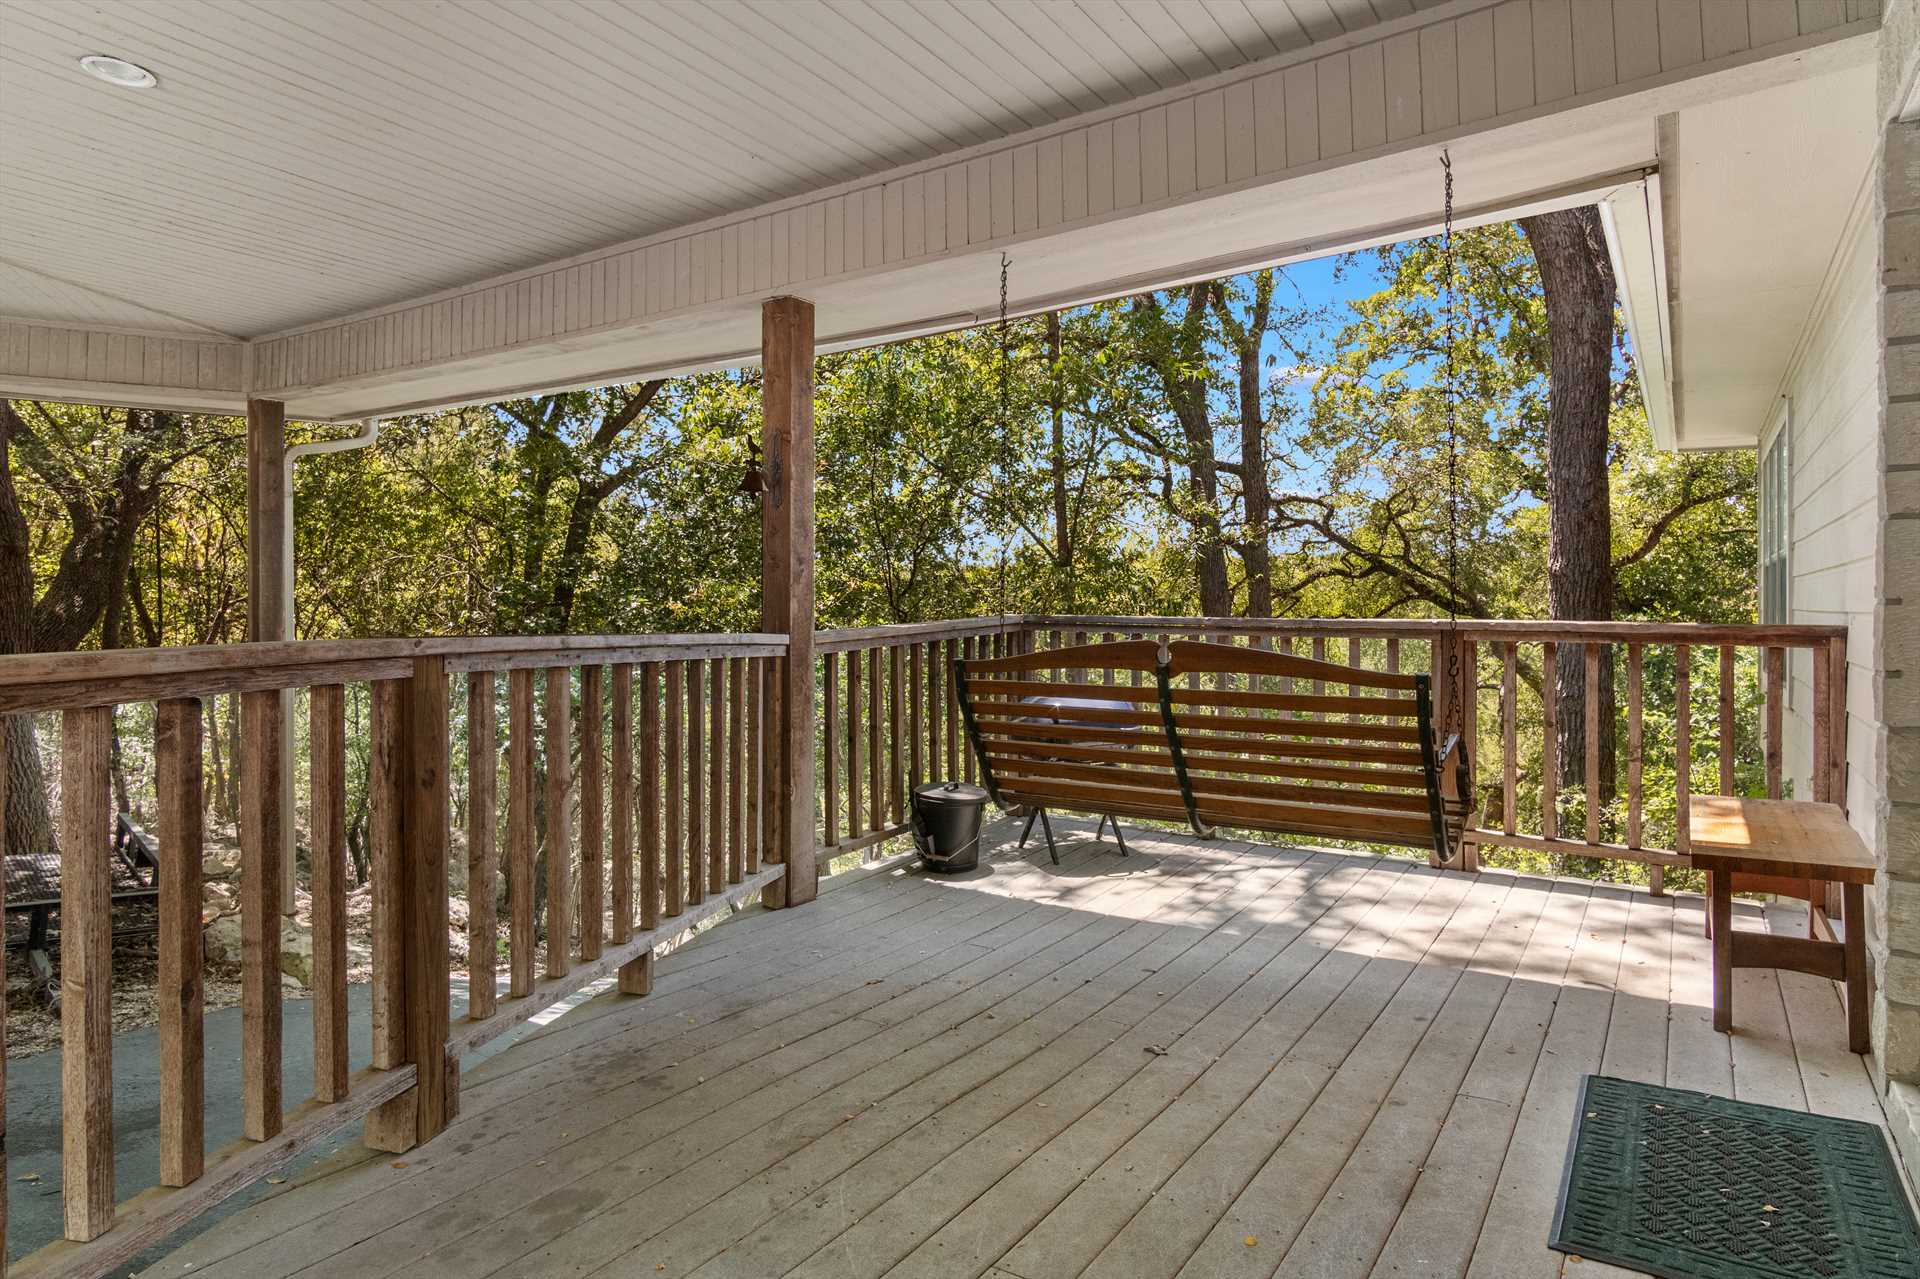                                                 Have a quiet swing on the deck's porch swing! It's the perfect place for relaxation and wildlife watching.